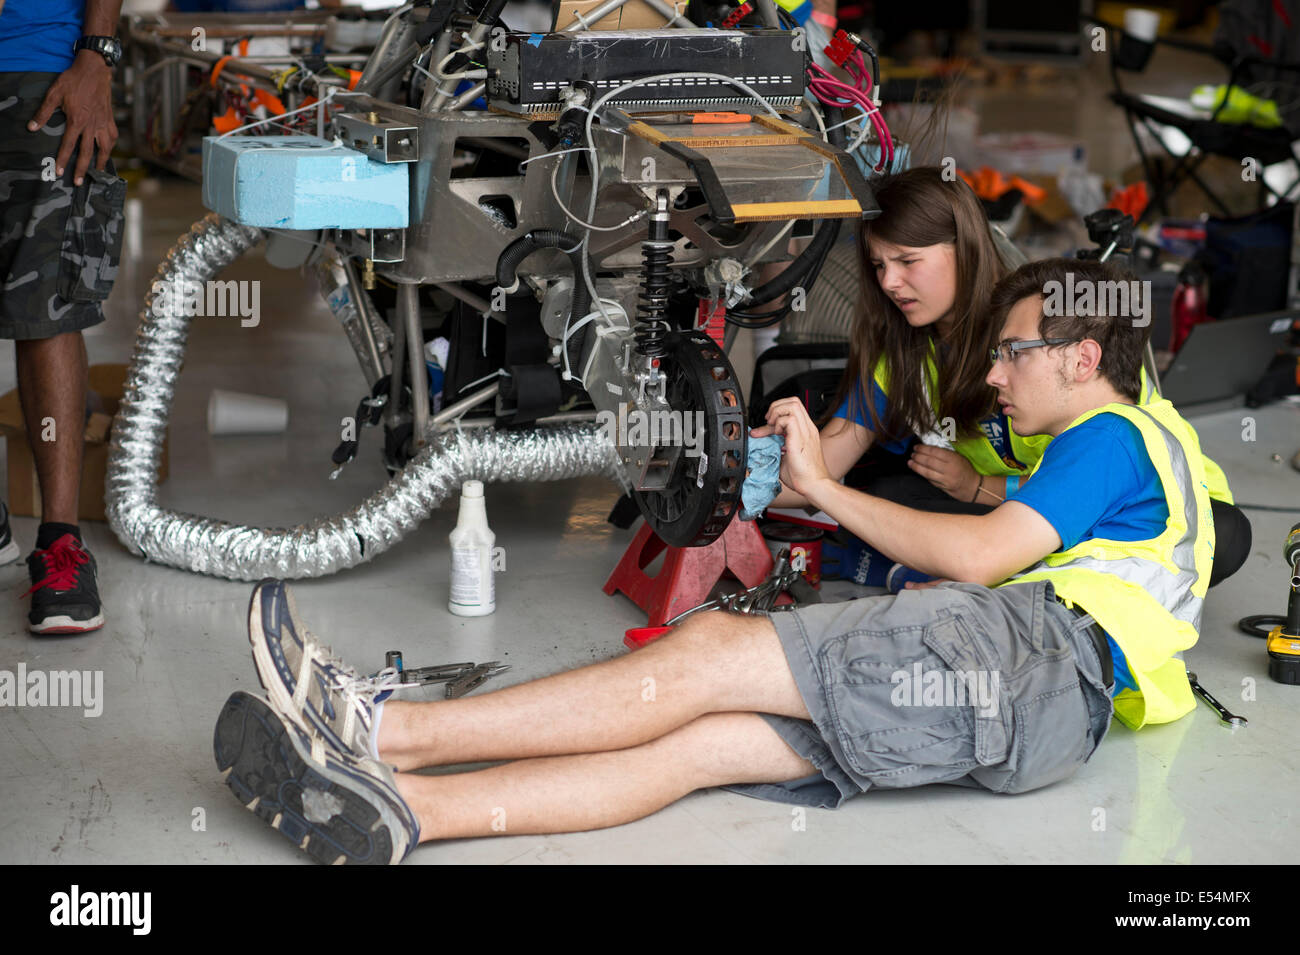 University of Kentucky team members work on their disabled electric motor during qualifying races for the 1,700-mile American So Stock Photo